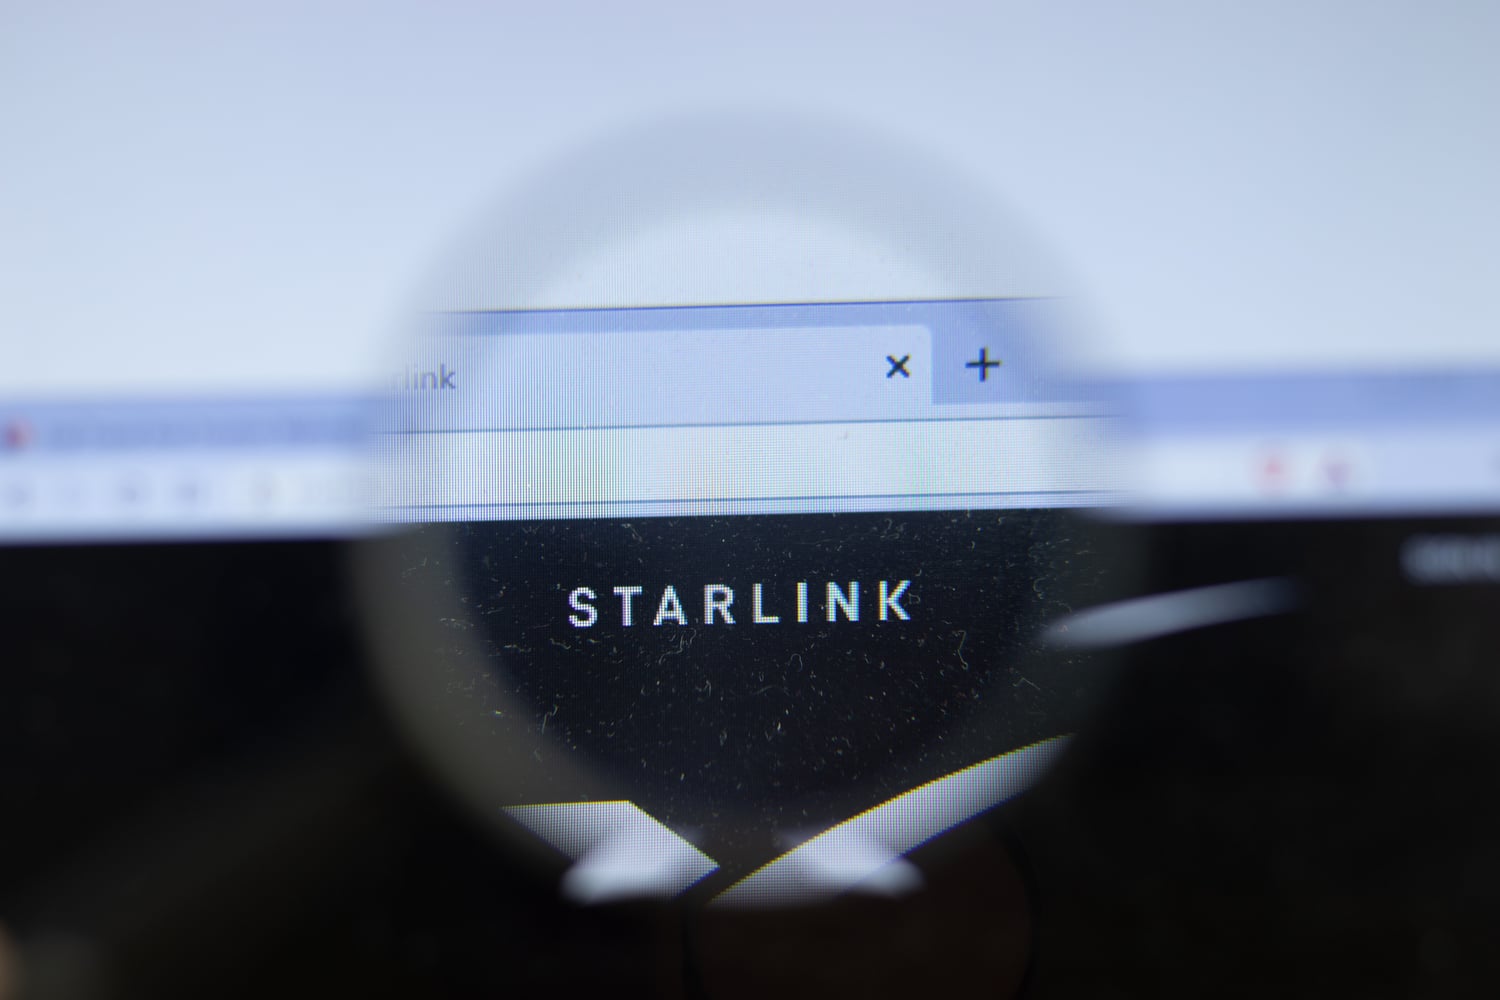 According to Elon Musk, Starlink has already crossed the 90,000 user mark

